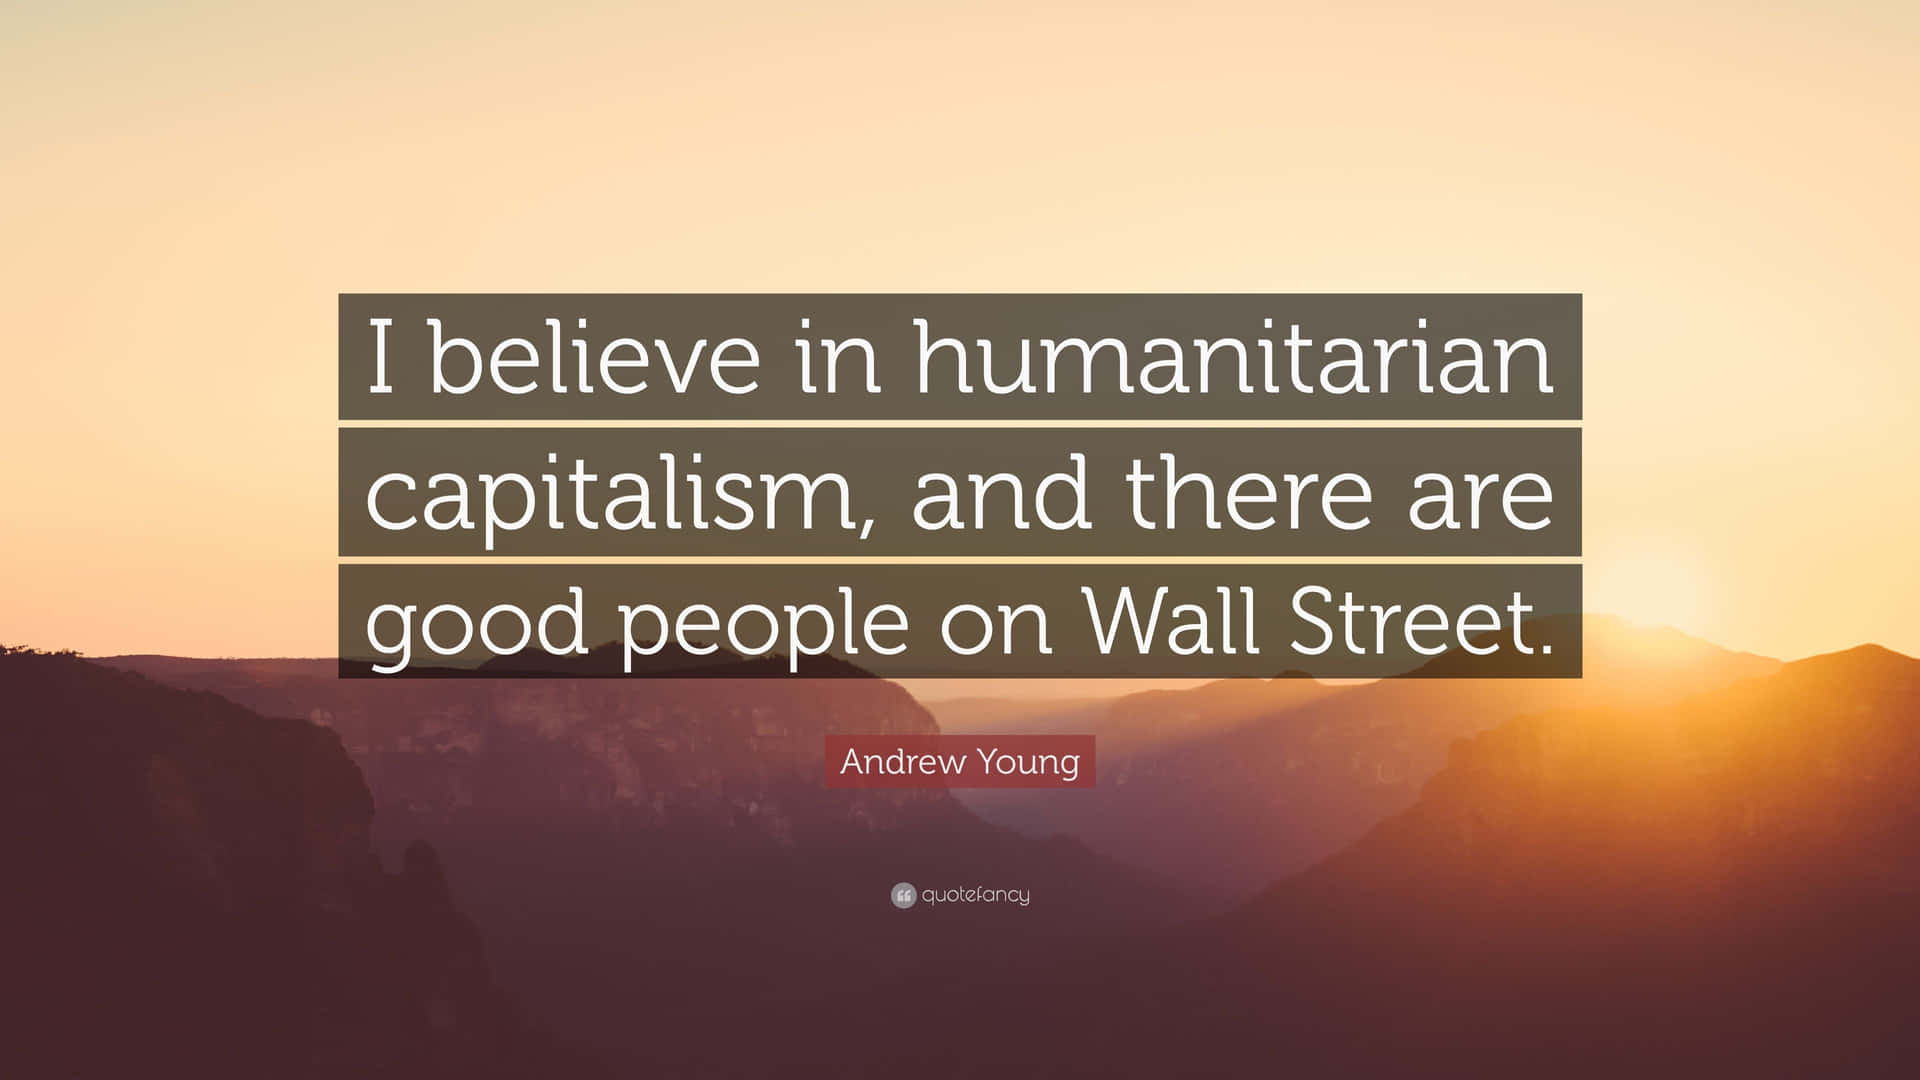 A Saying About Humanitarian Capitalism Wallpaper